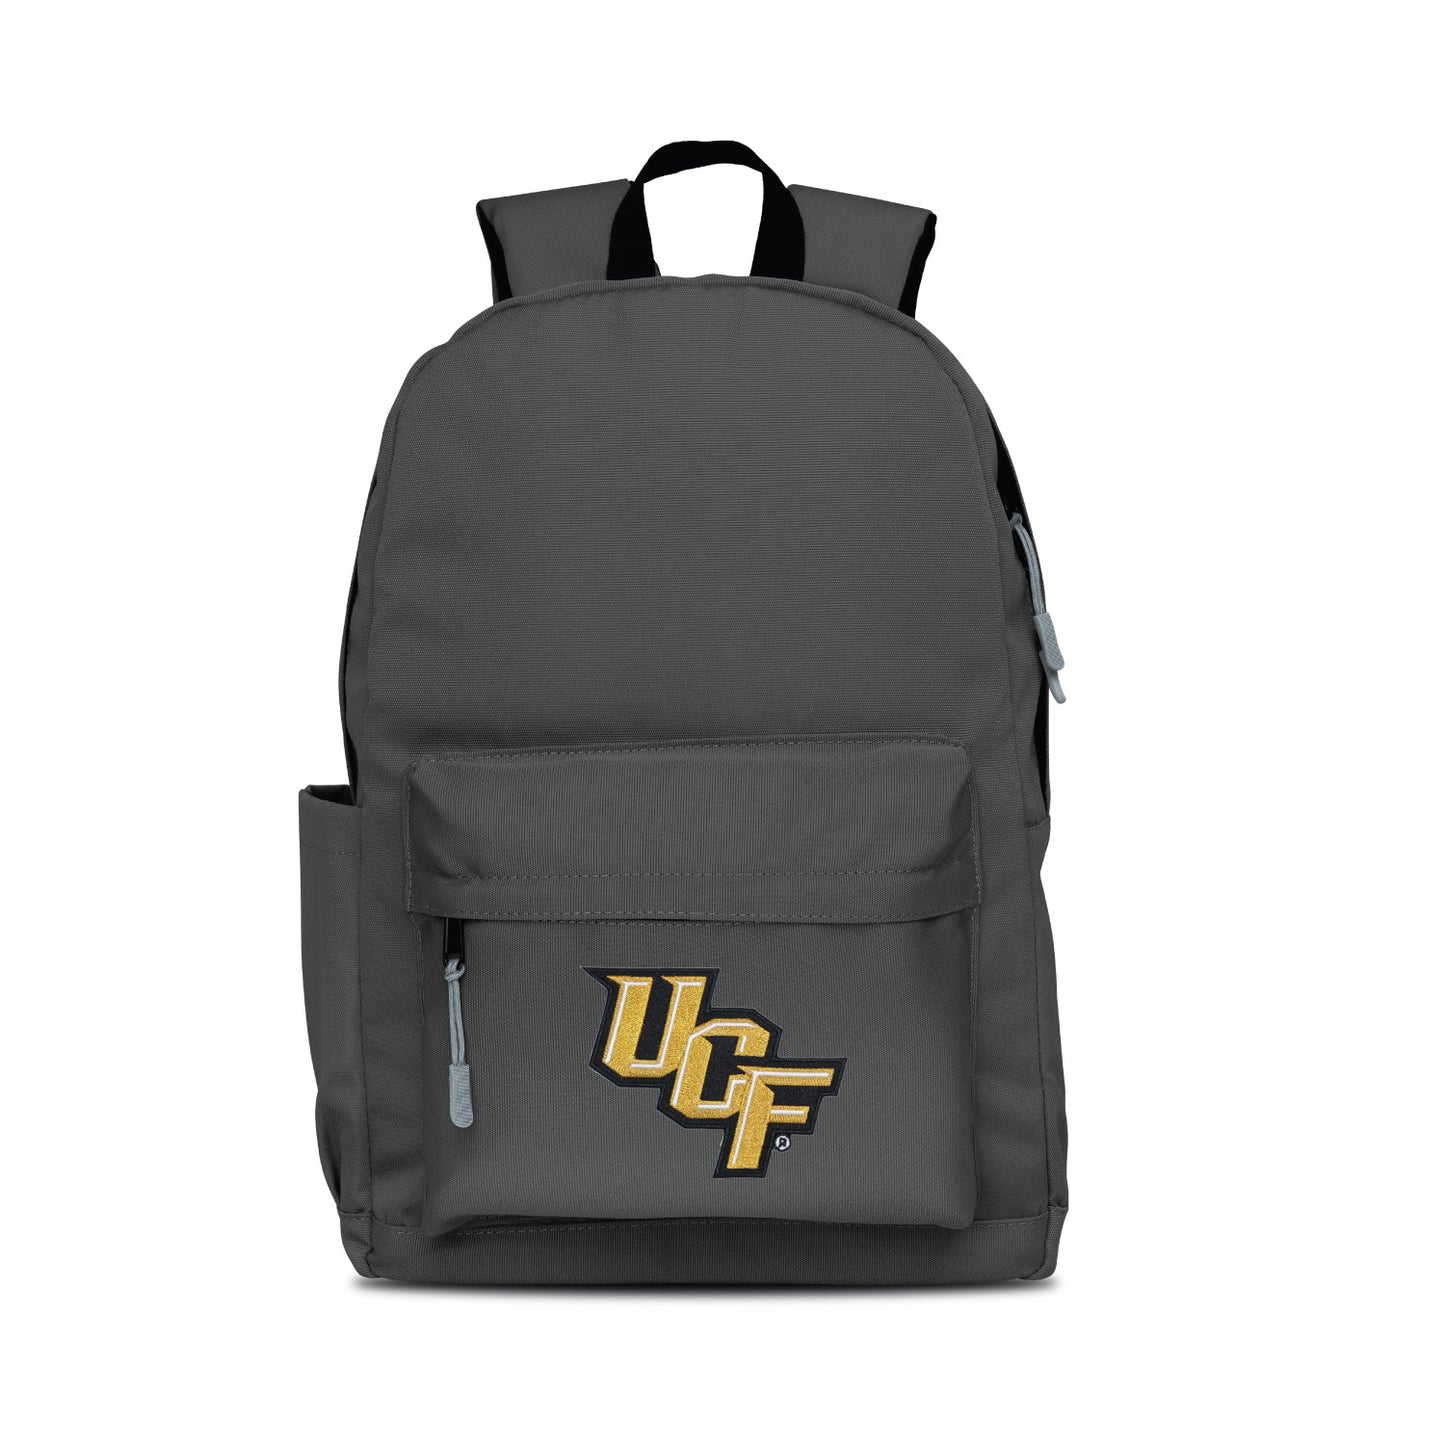 UCF Knights Campus Laptop Backpack- Gray